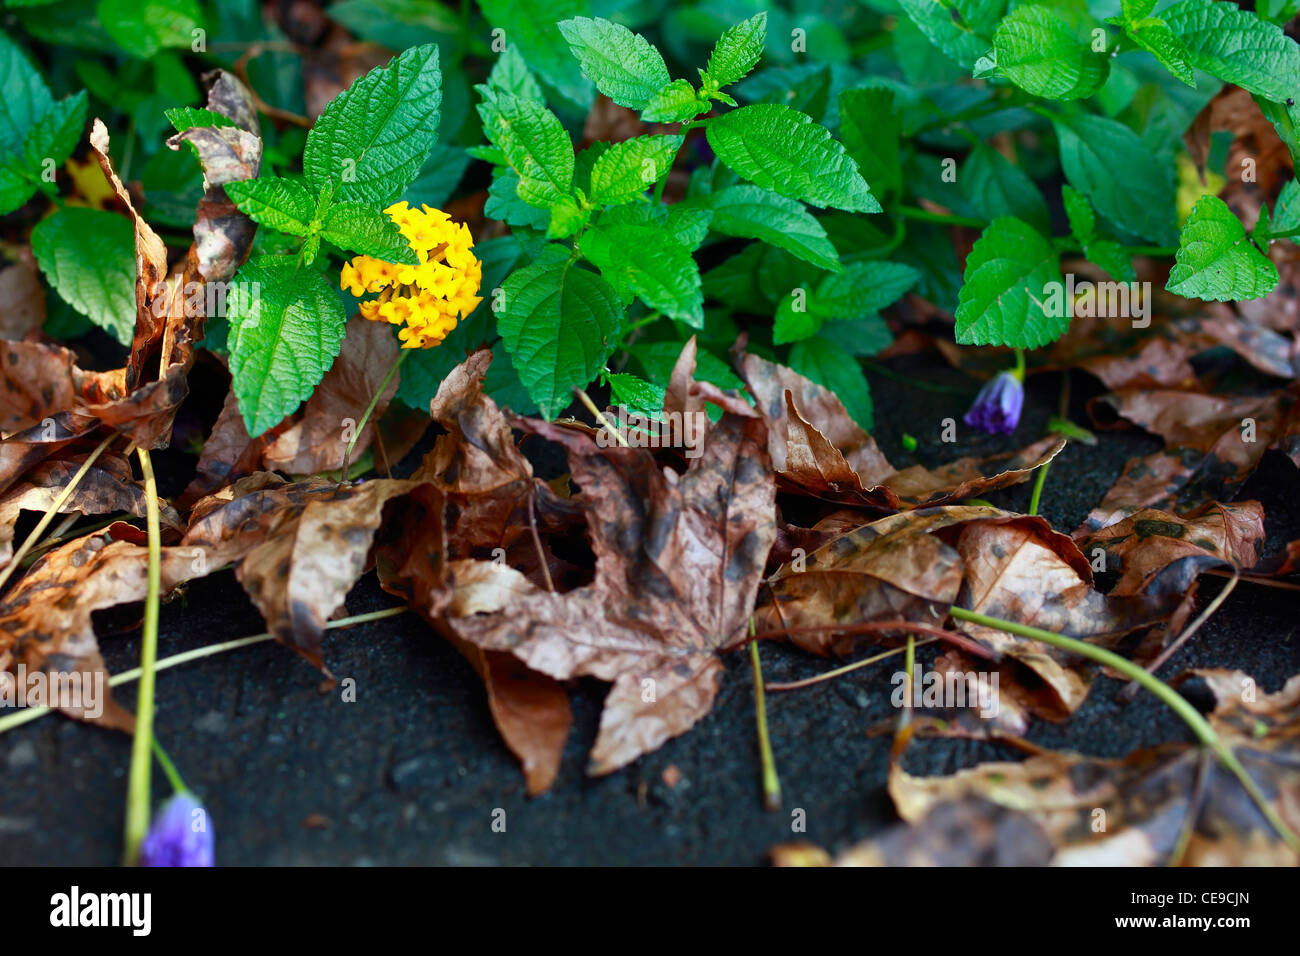 Decaying leaves clustered below a yellow flowering Plectranthus groundcover. Stock Photo